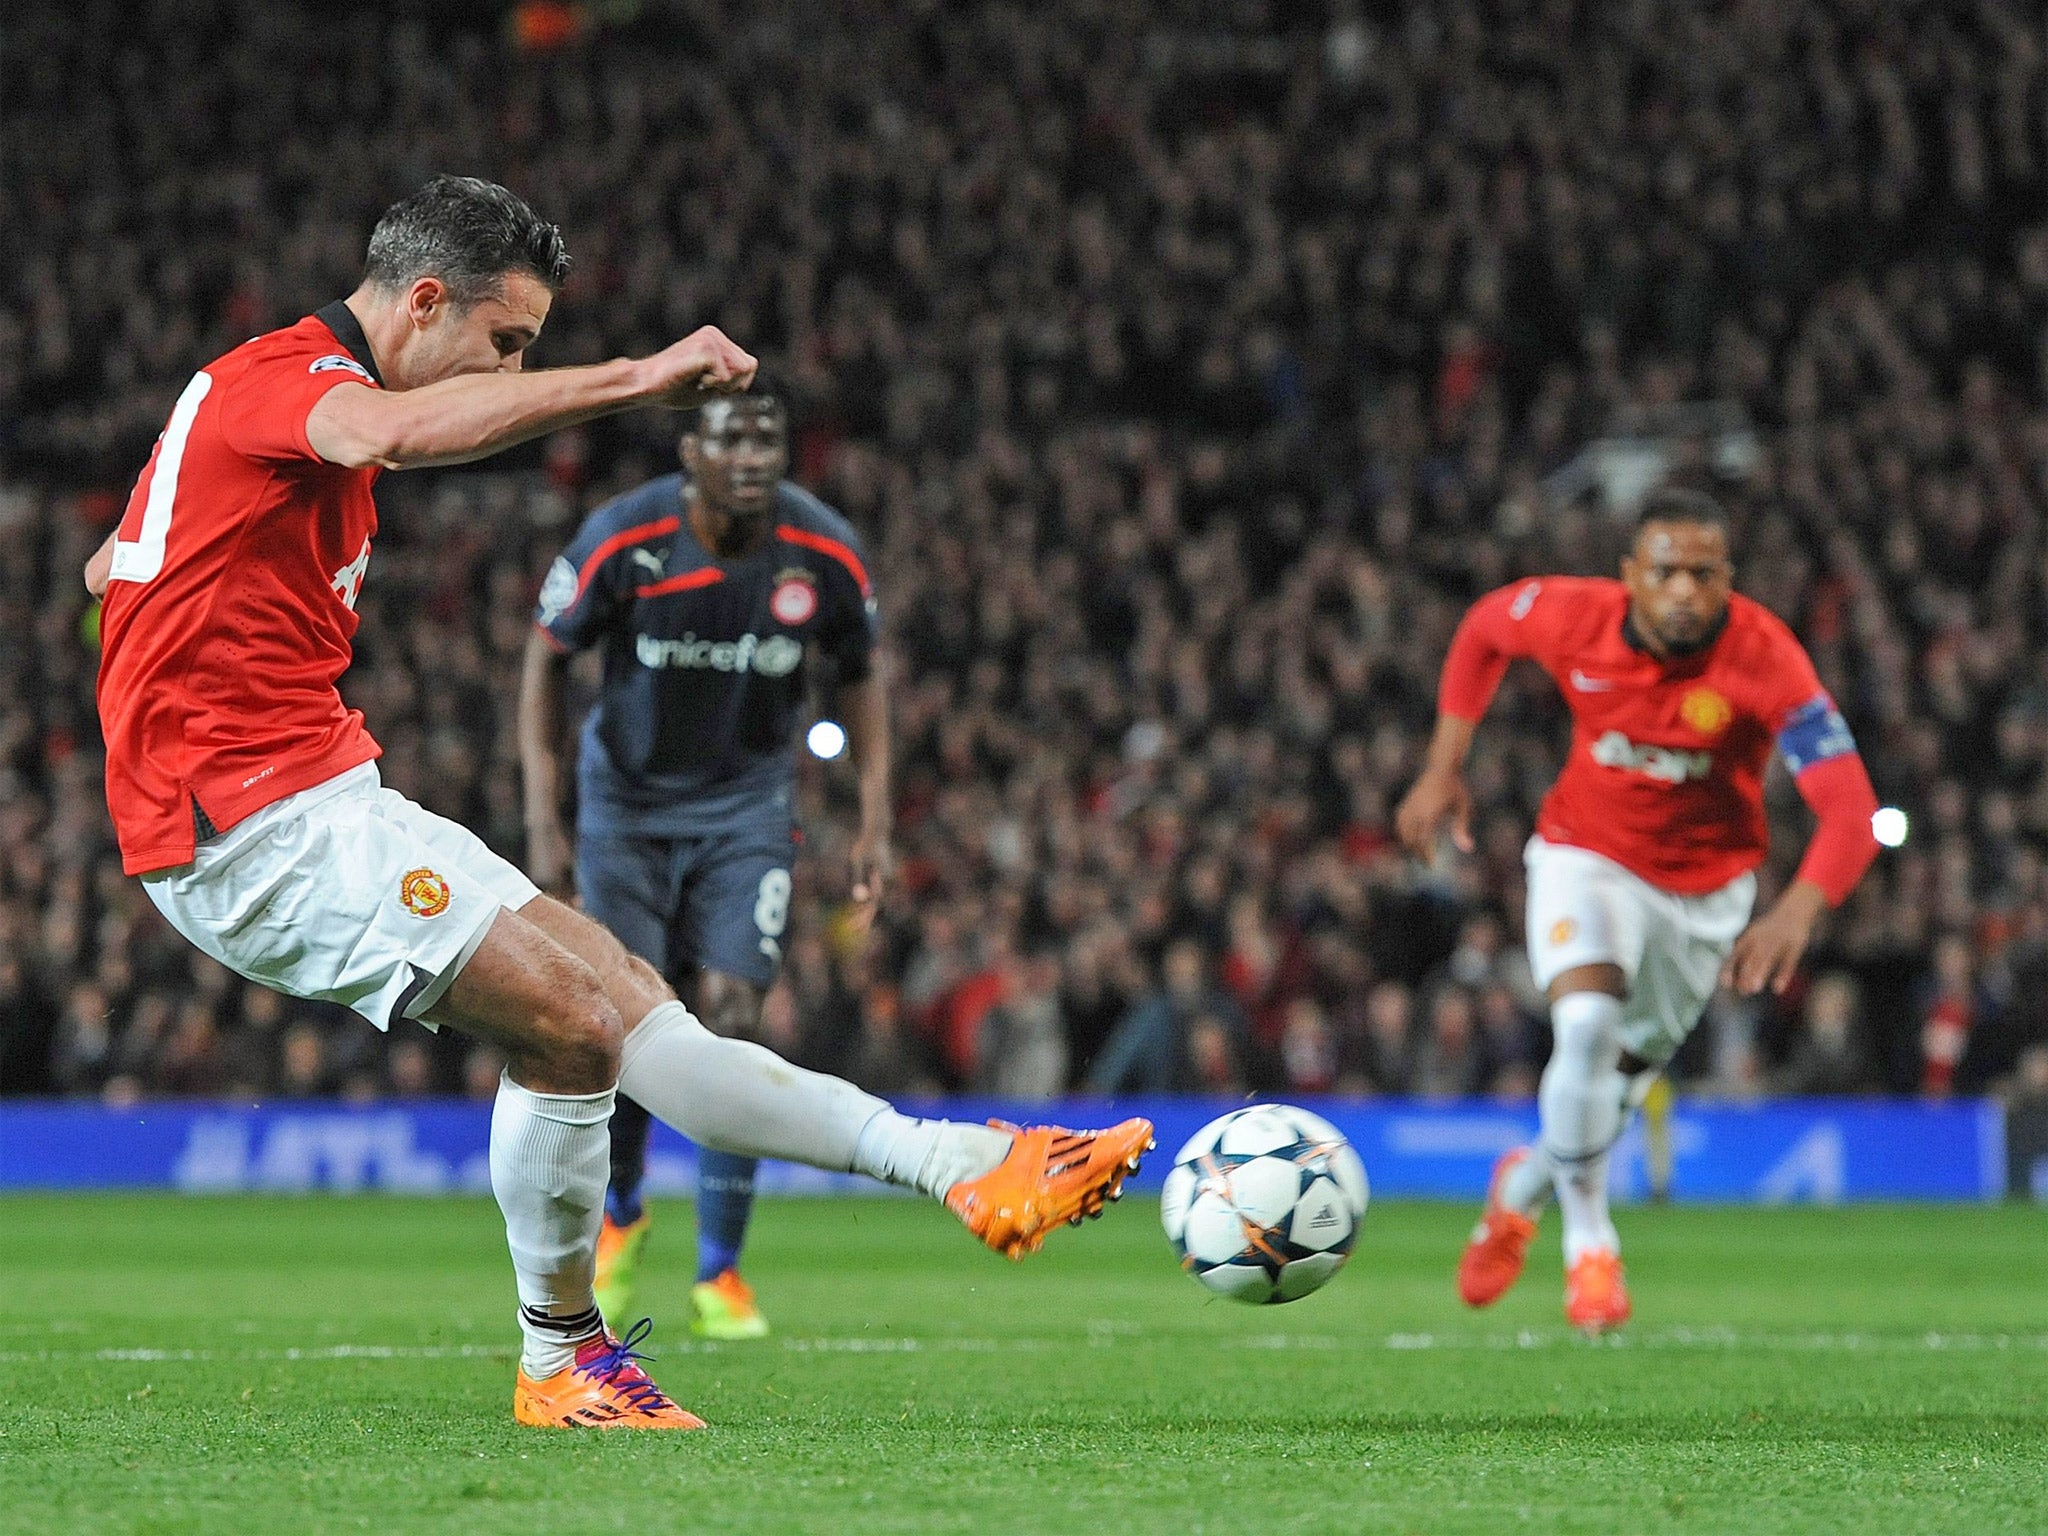 Robin van Persie converts a penalty to give United the lead on the night